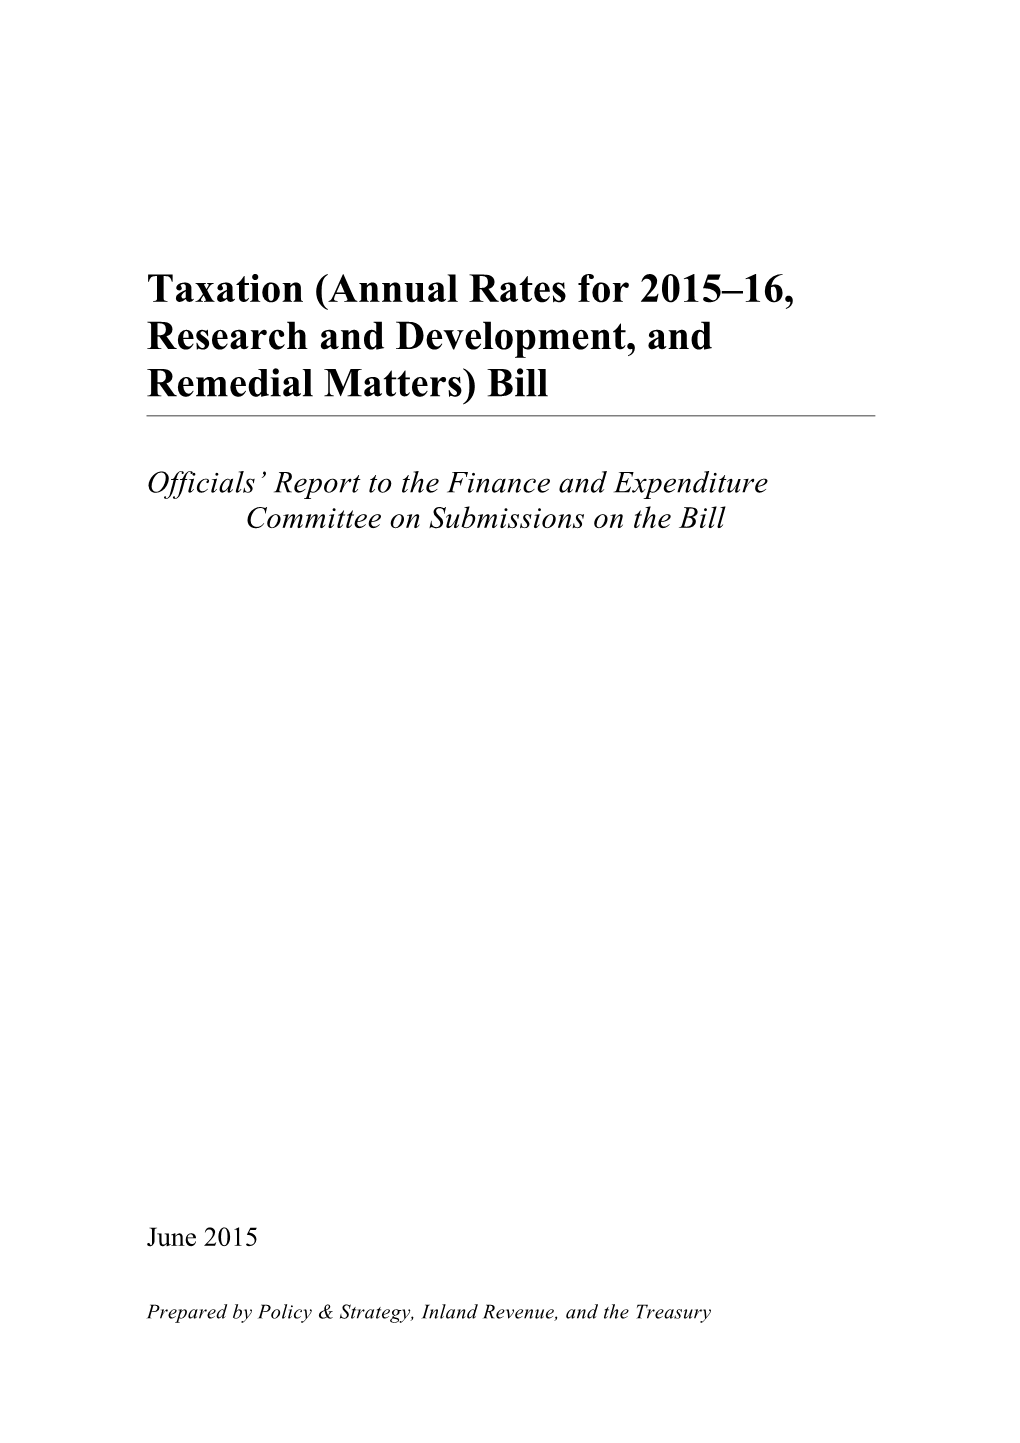 Taxation (Annual Rates for 2015 16, Research and Development, and Remedial Matters) Bill